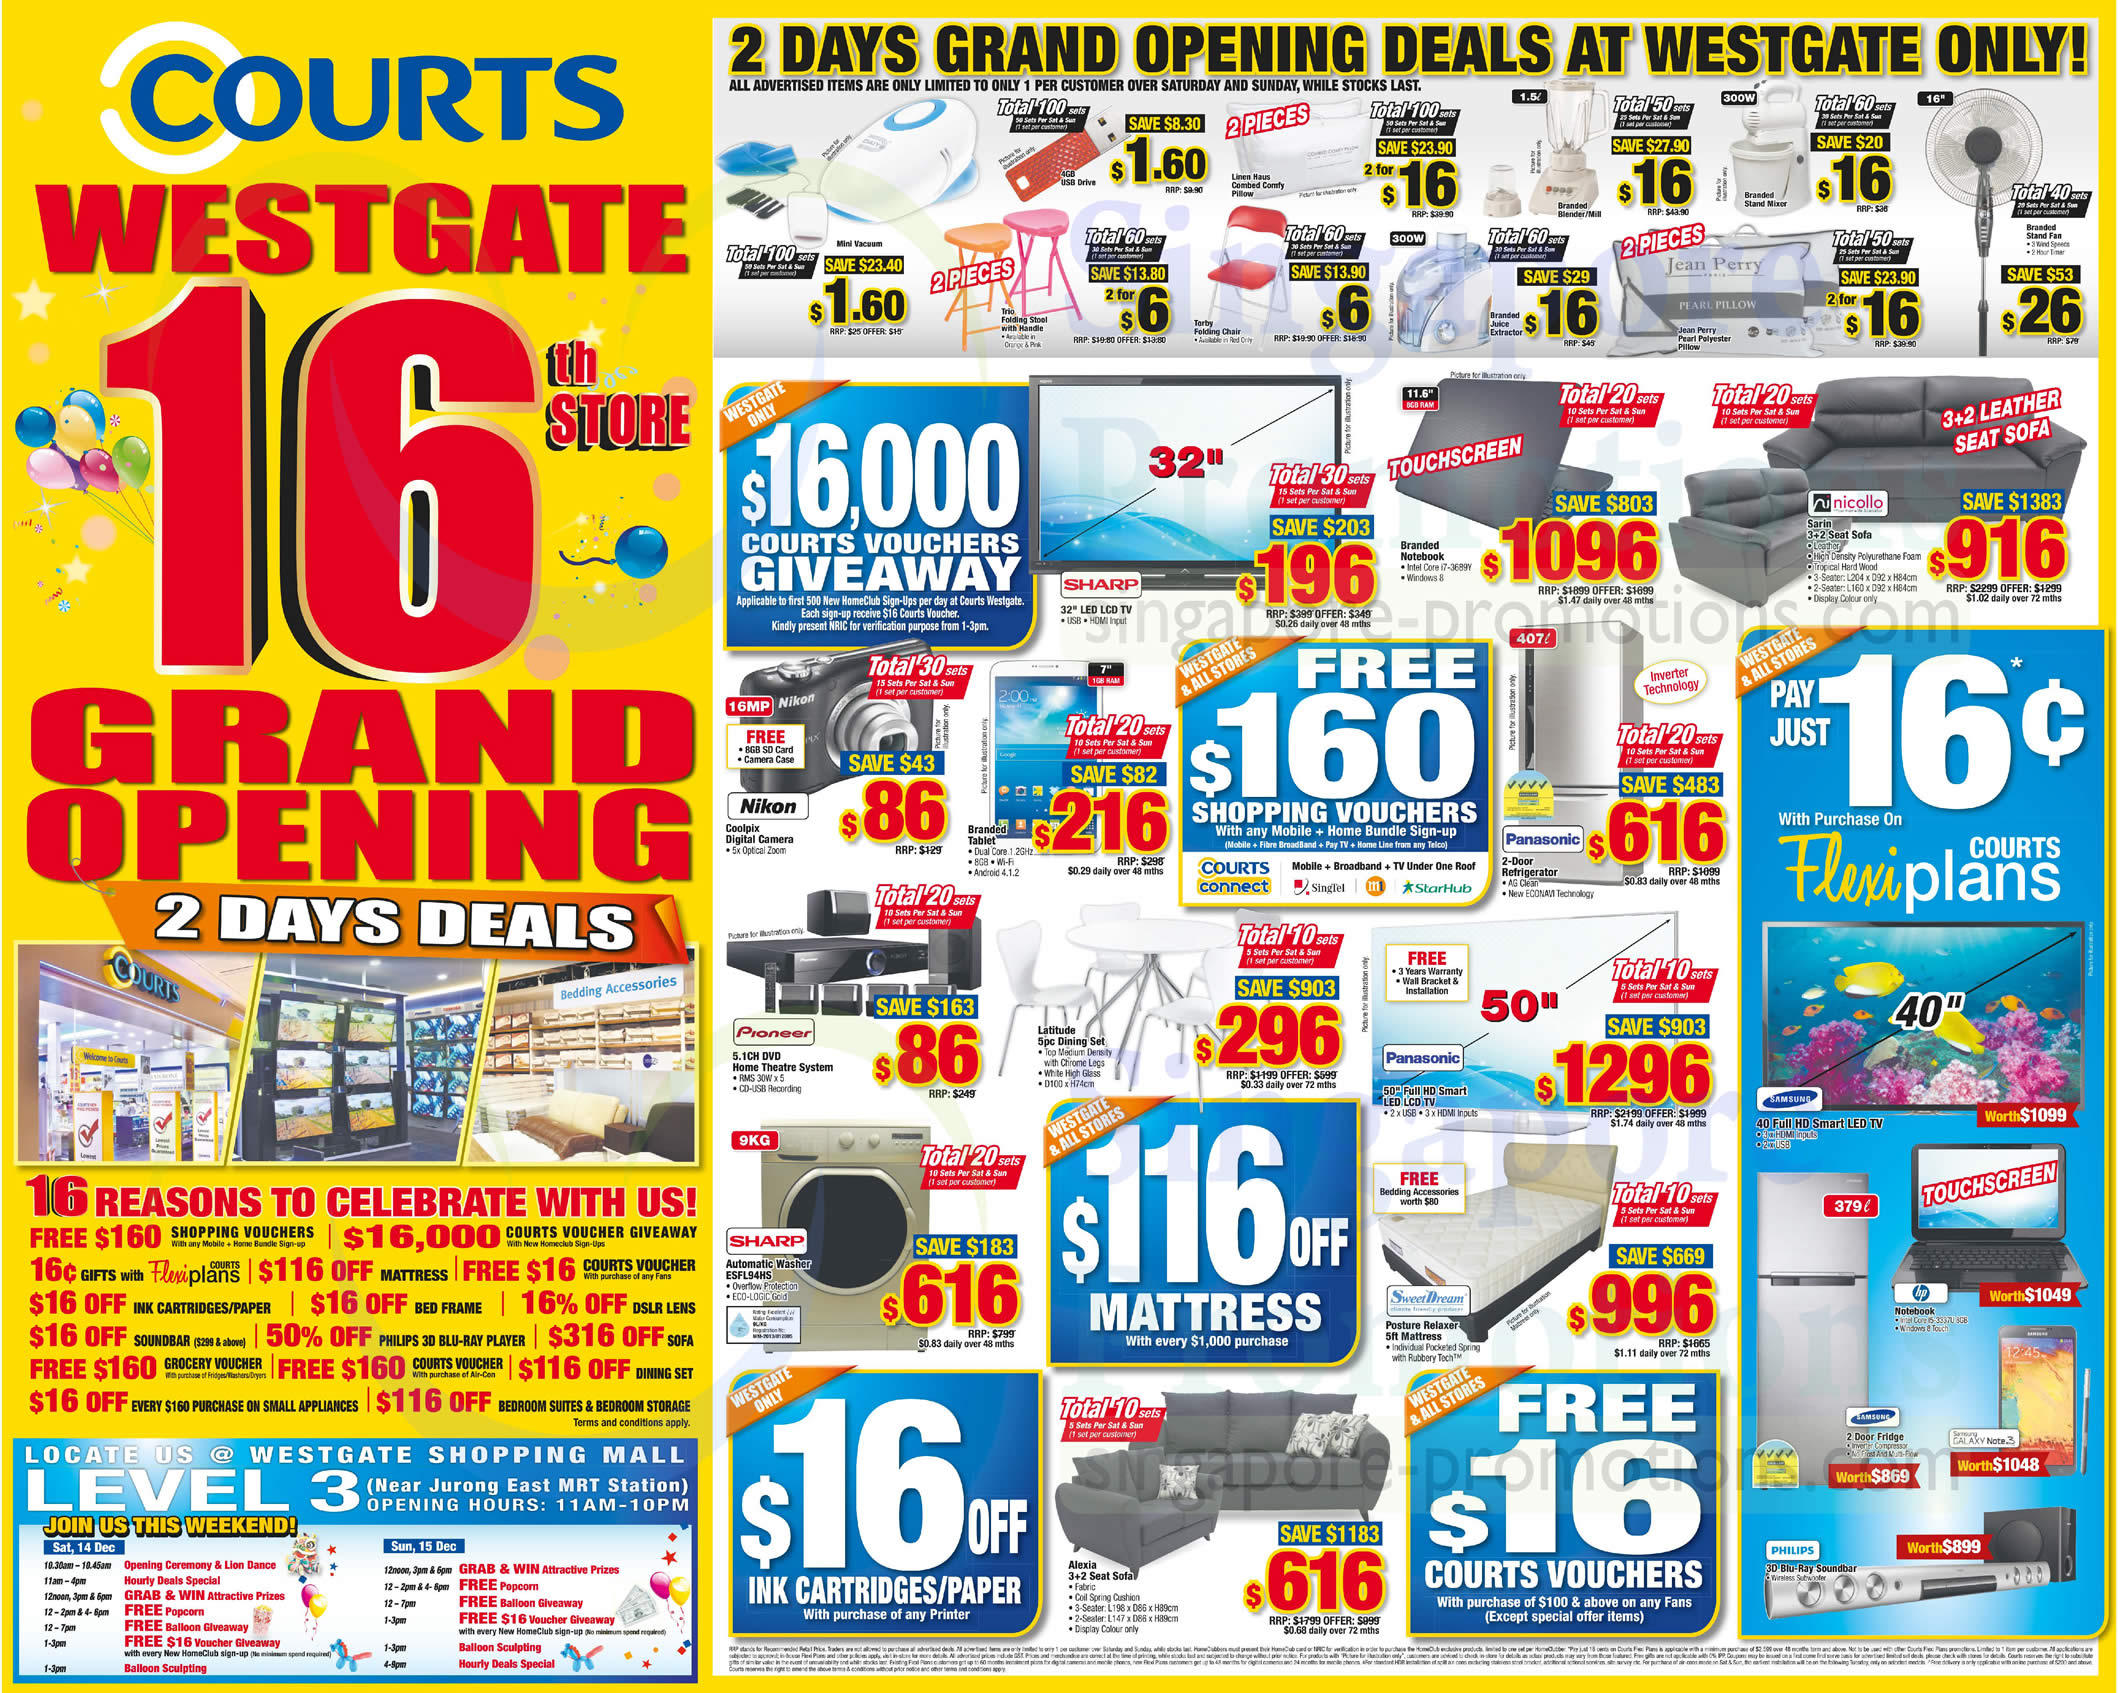 Featured image for Courts 16th Store Grand Opening Celebration Deals @ Islandwide 14 - 15 Dec 2013